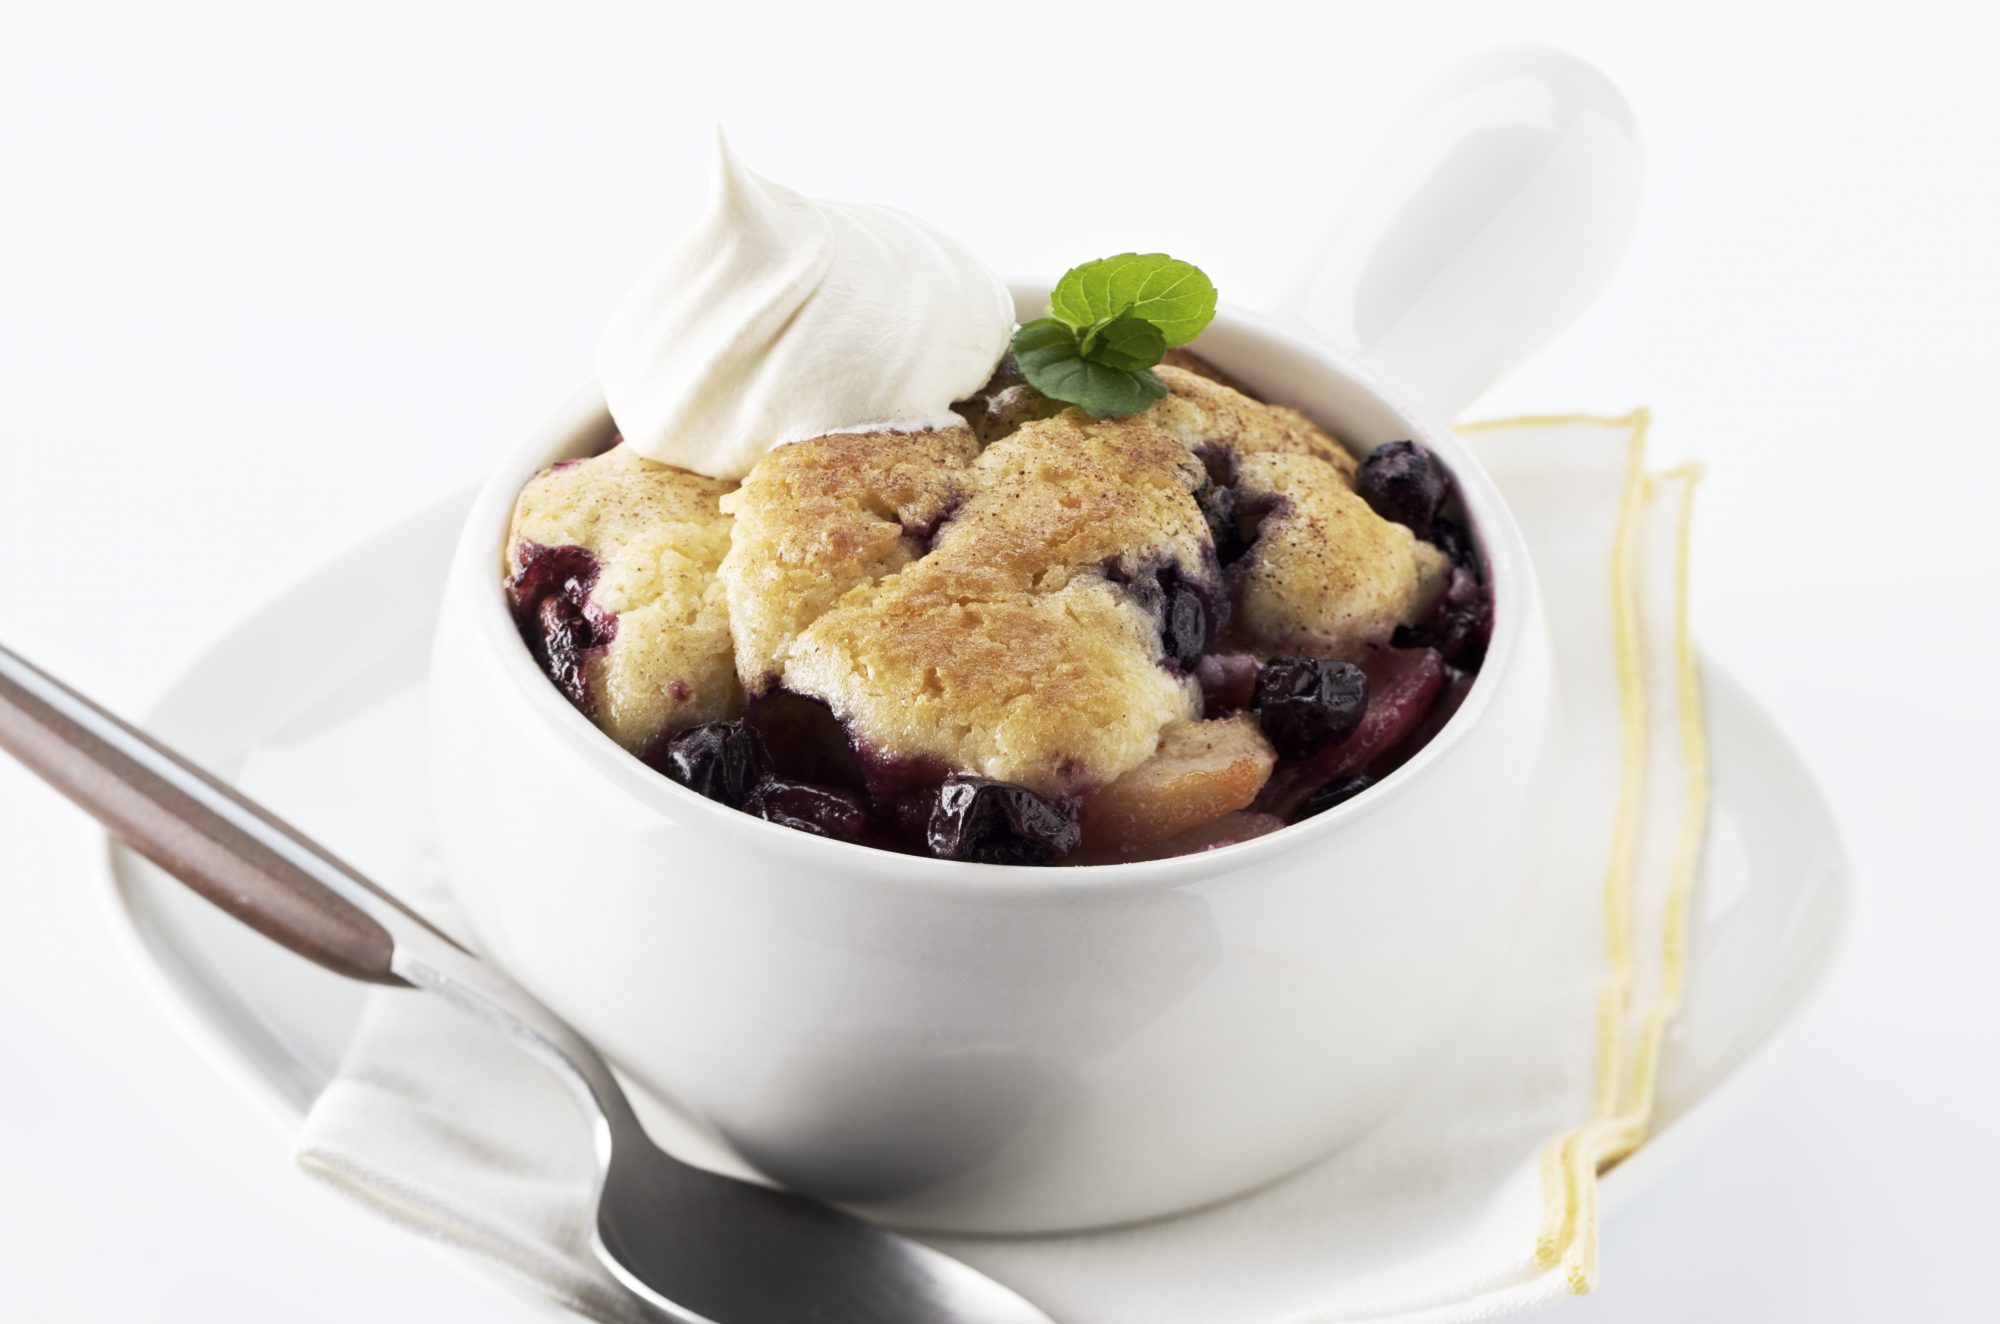 Seaside blueberry Grunt in a white bowl